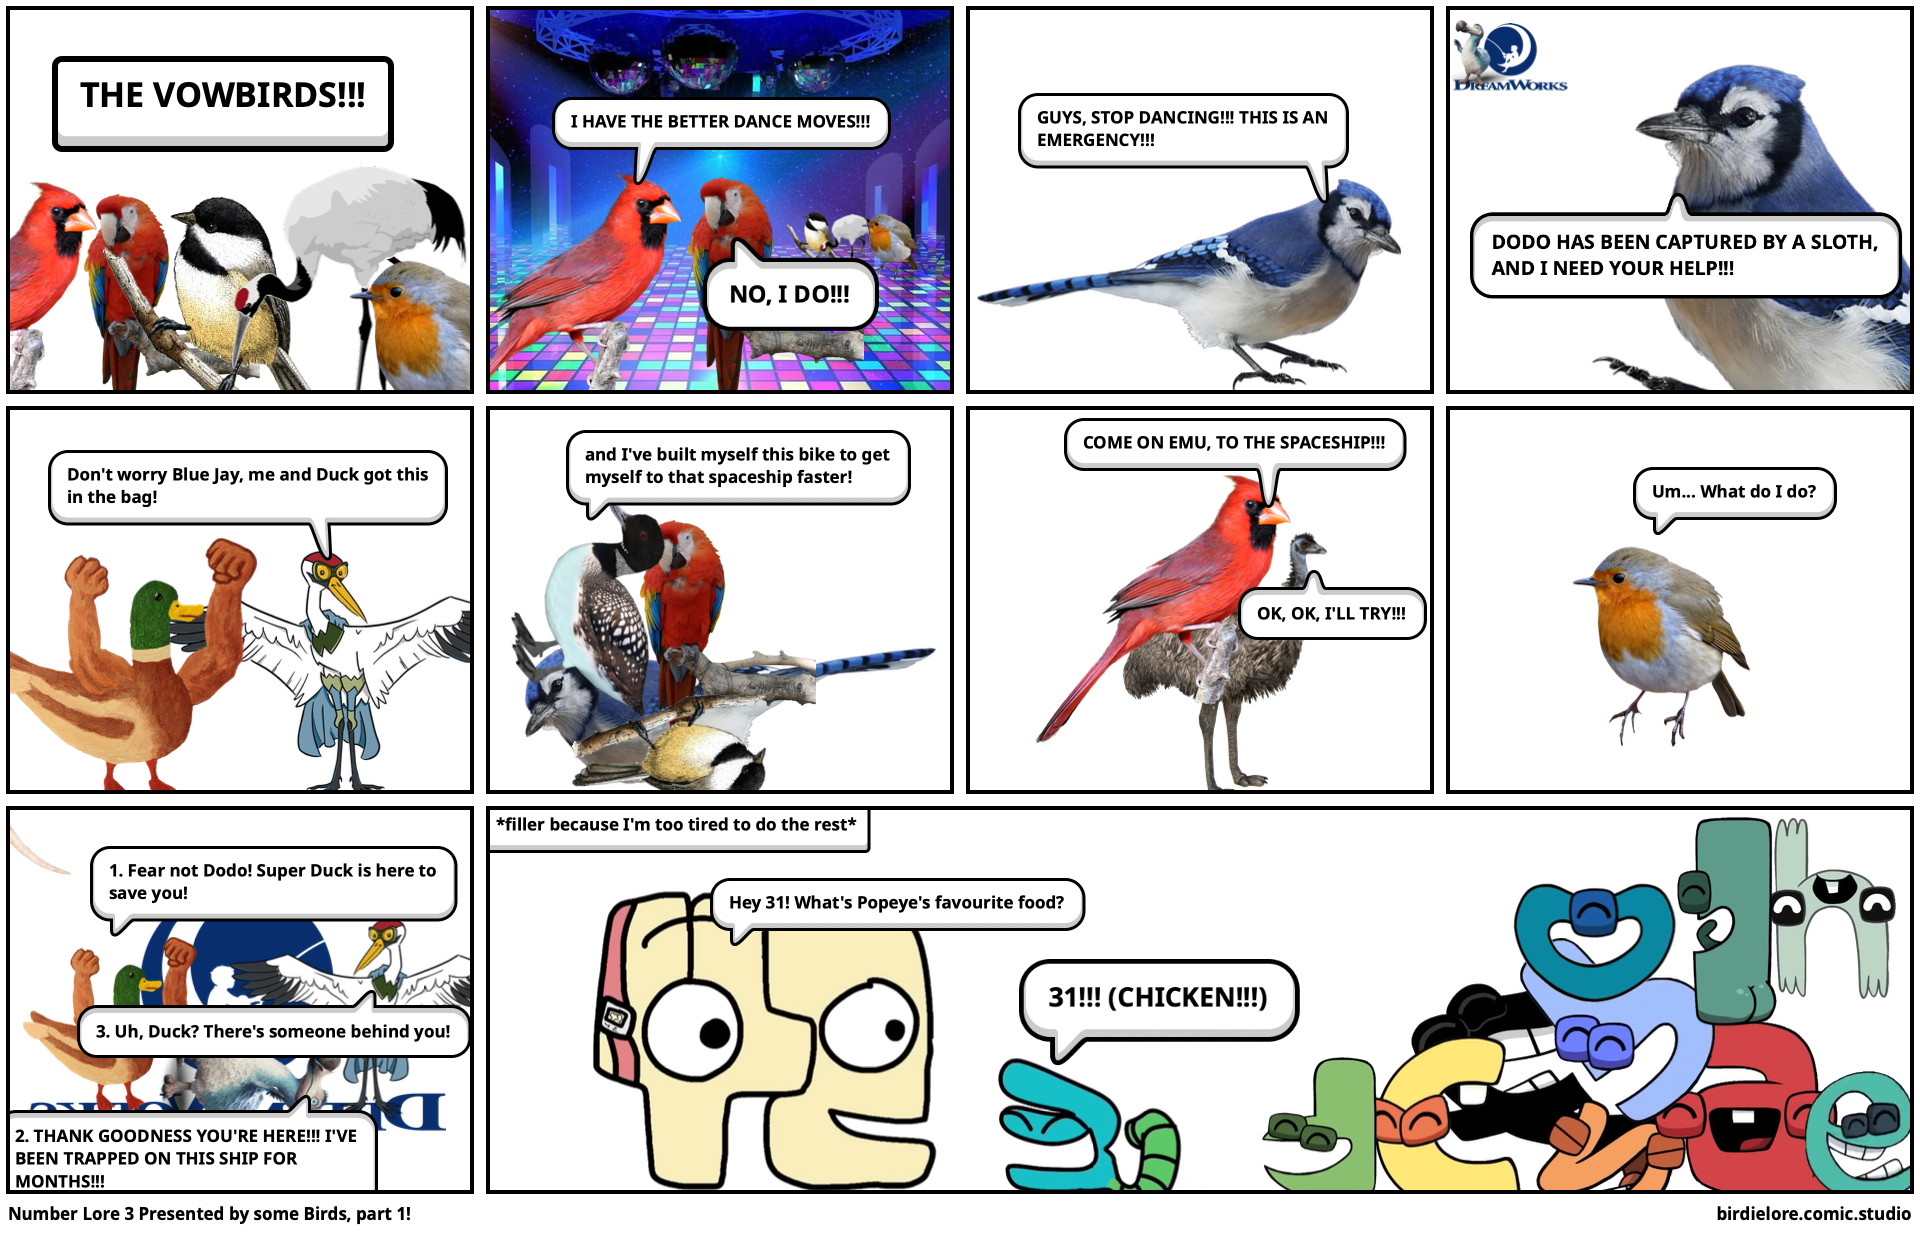 Number Lore 3 Presented by some Birds, part 1!